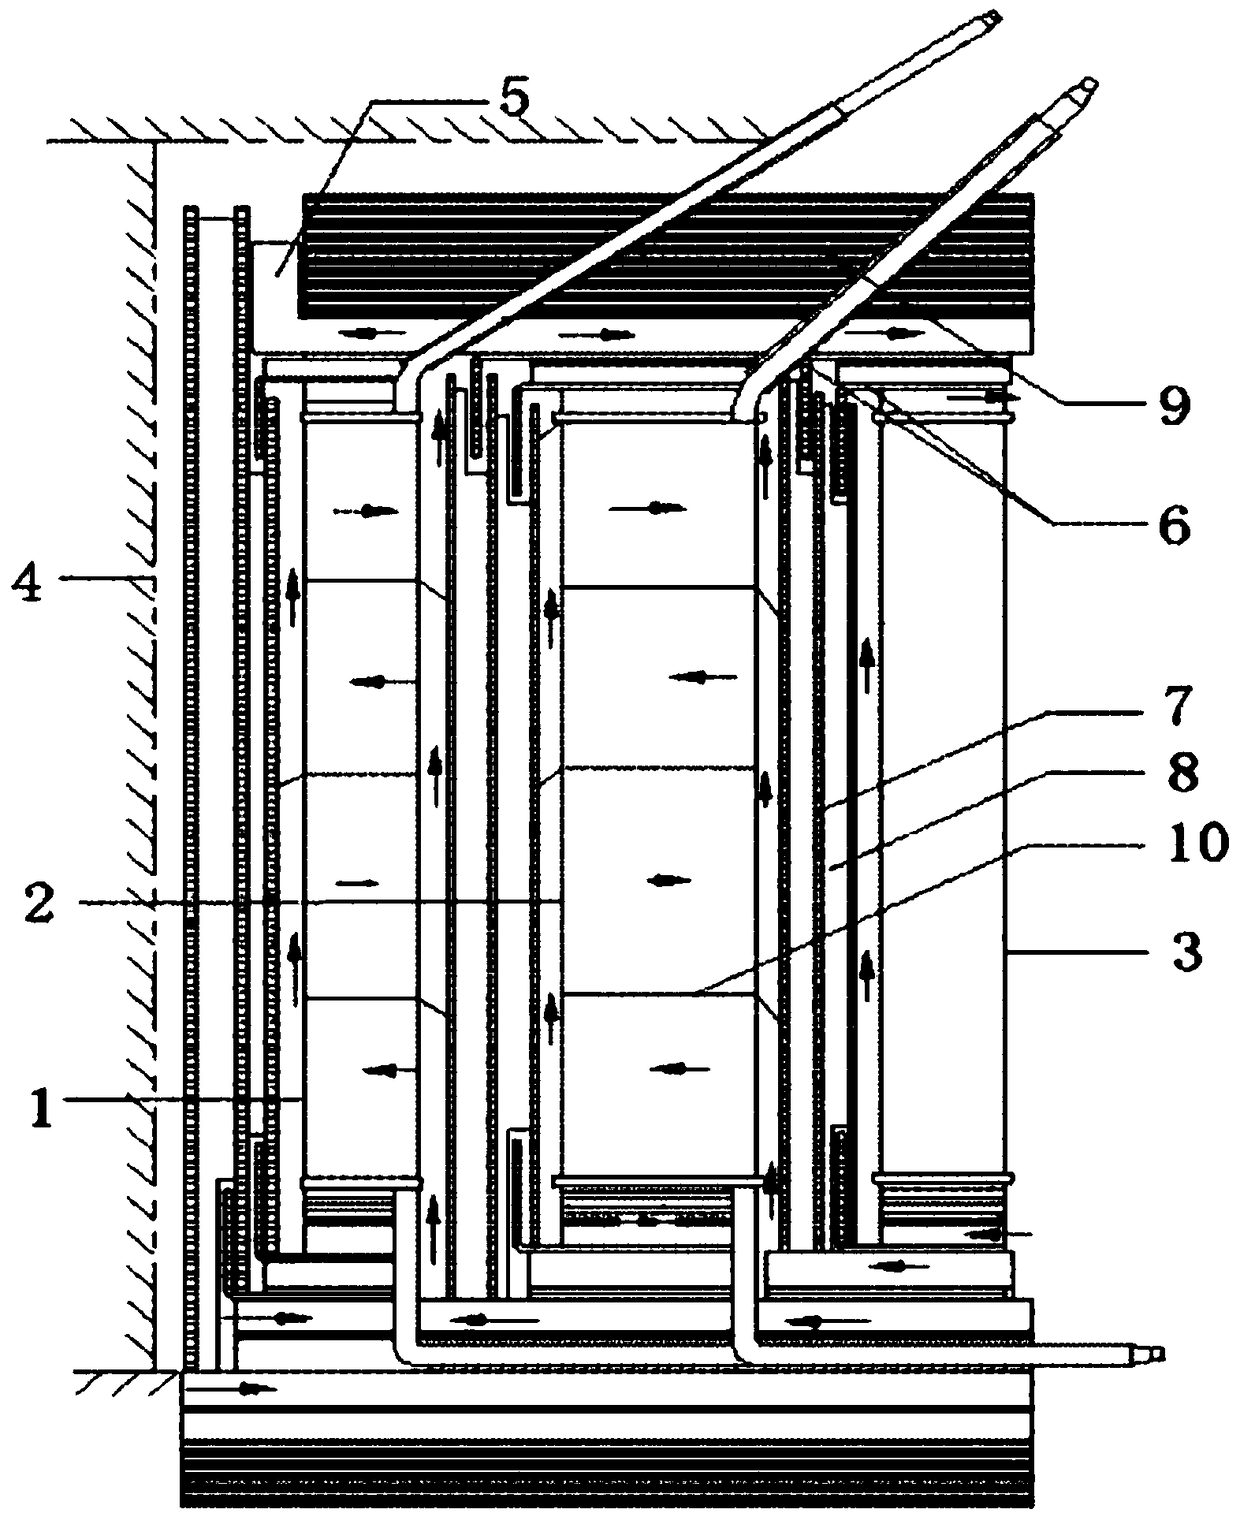 Electric furnace transformer body structure for preventing transformer windings from being overheated locally